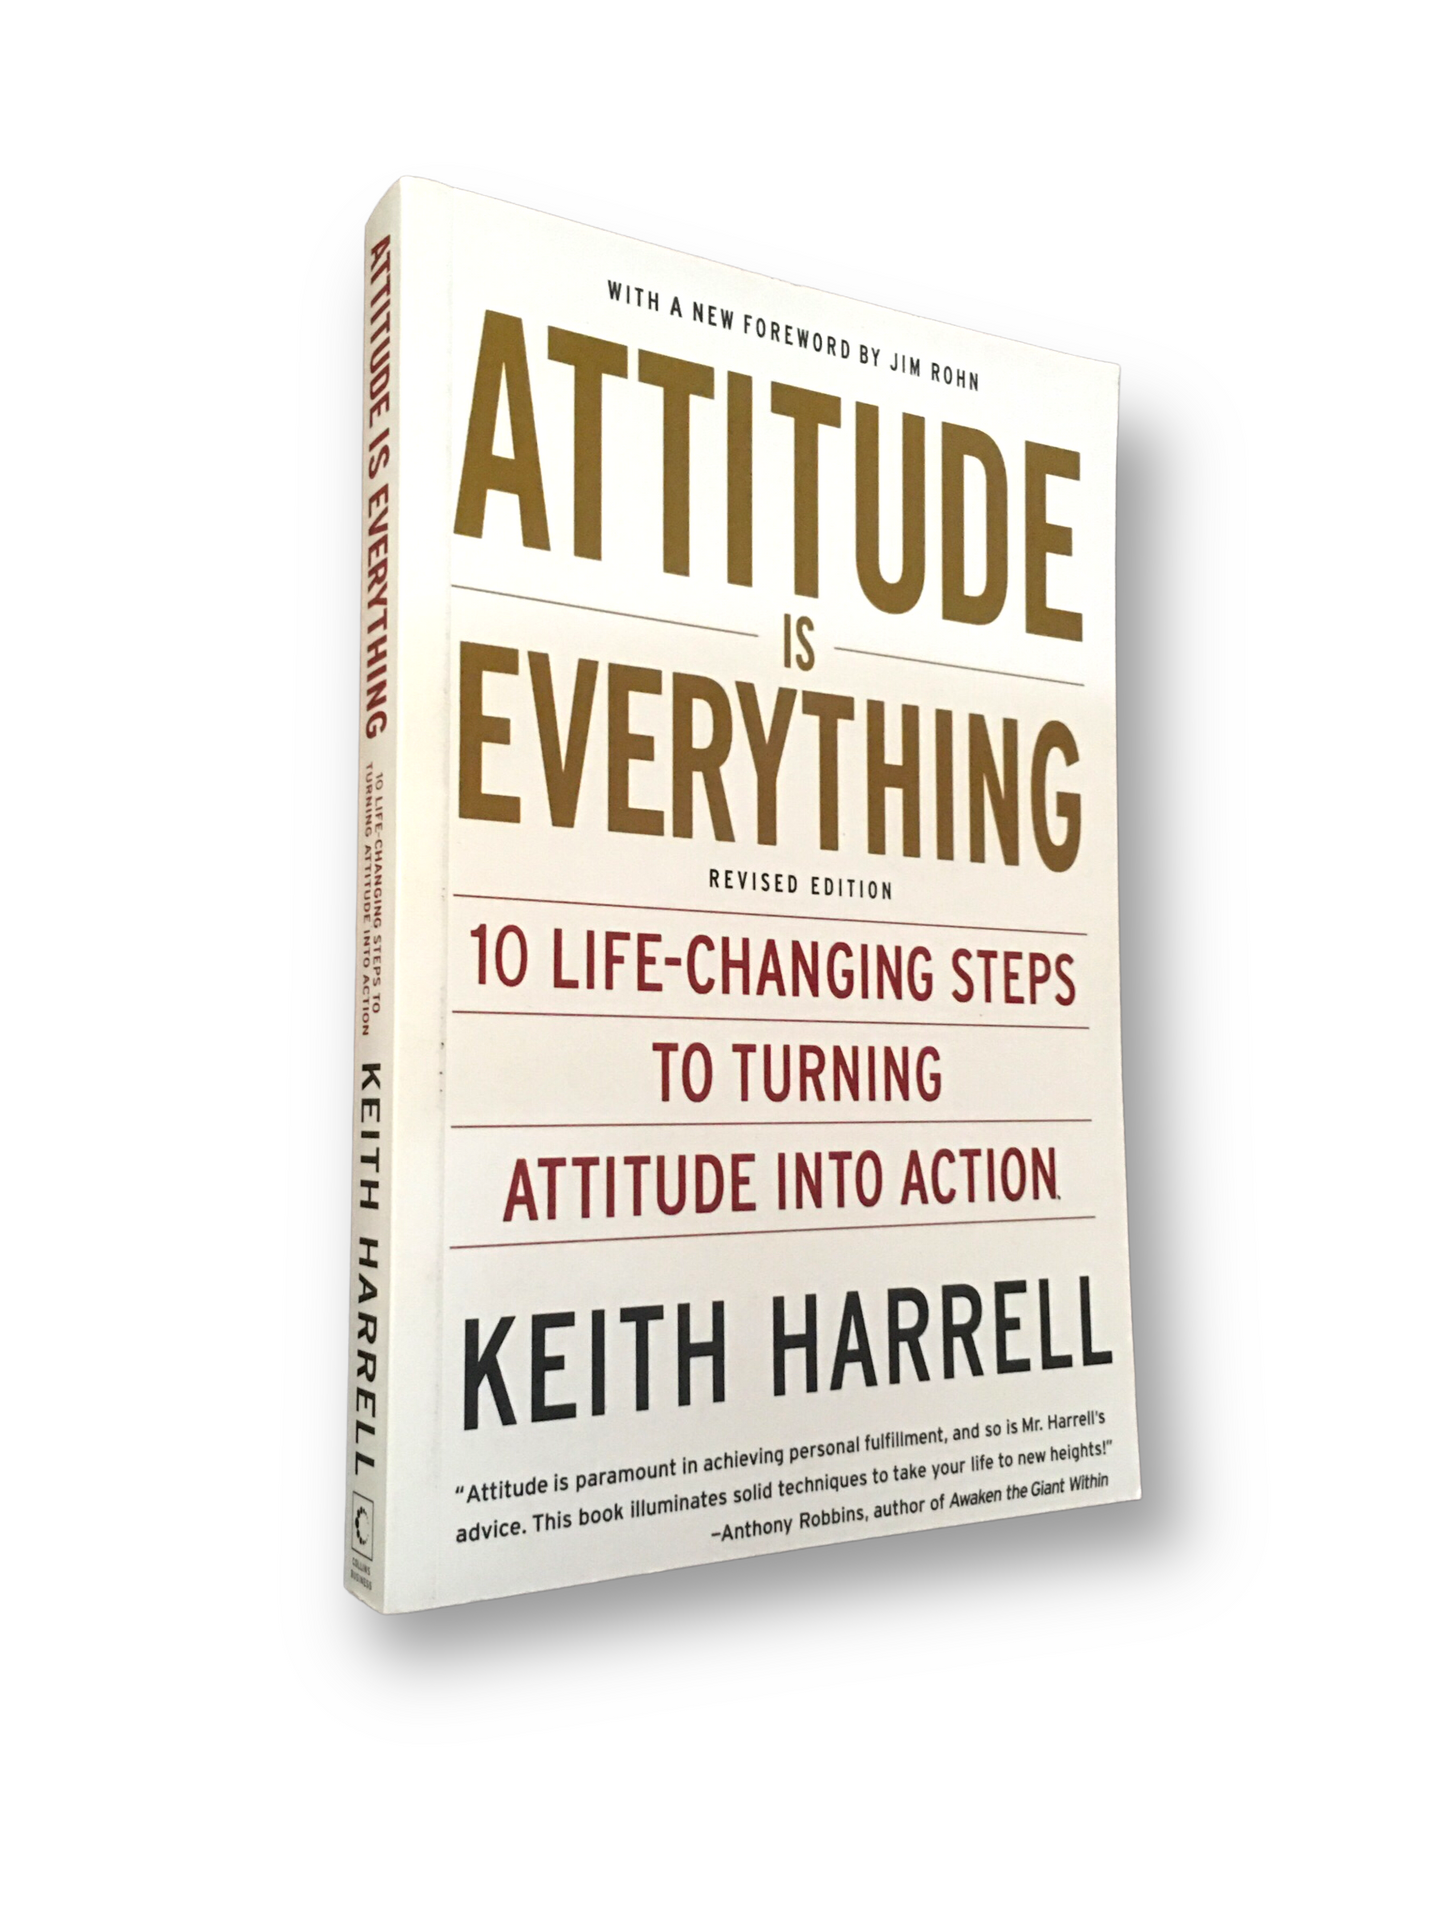 ATTITUDE IS EVERYTHING by Keith Harrell